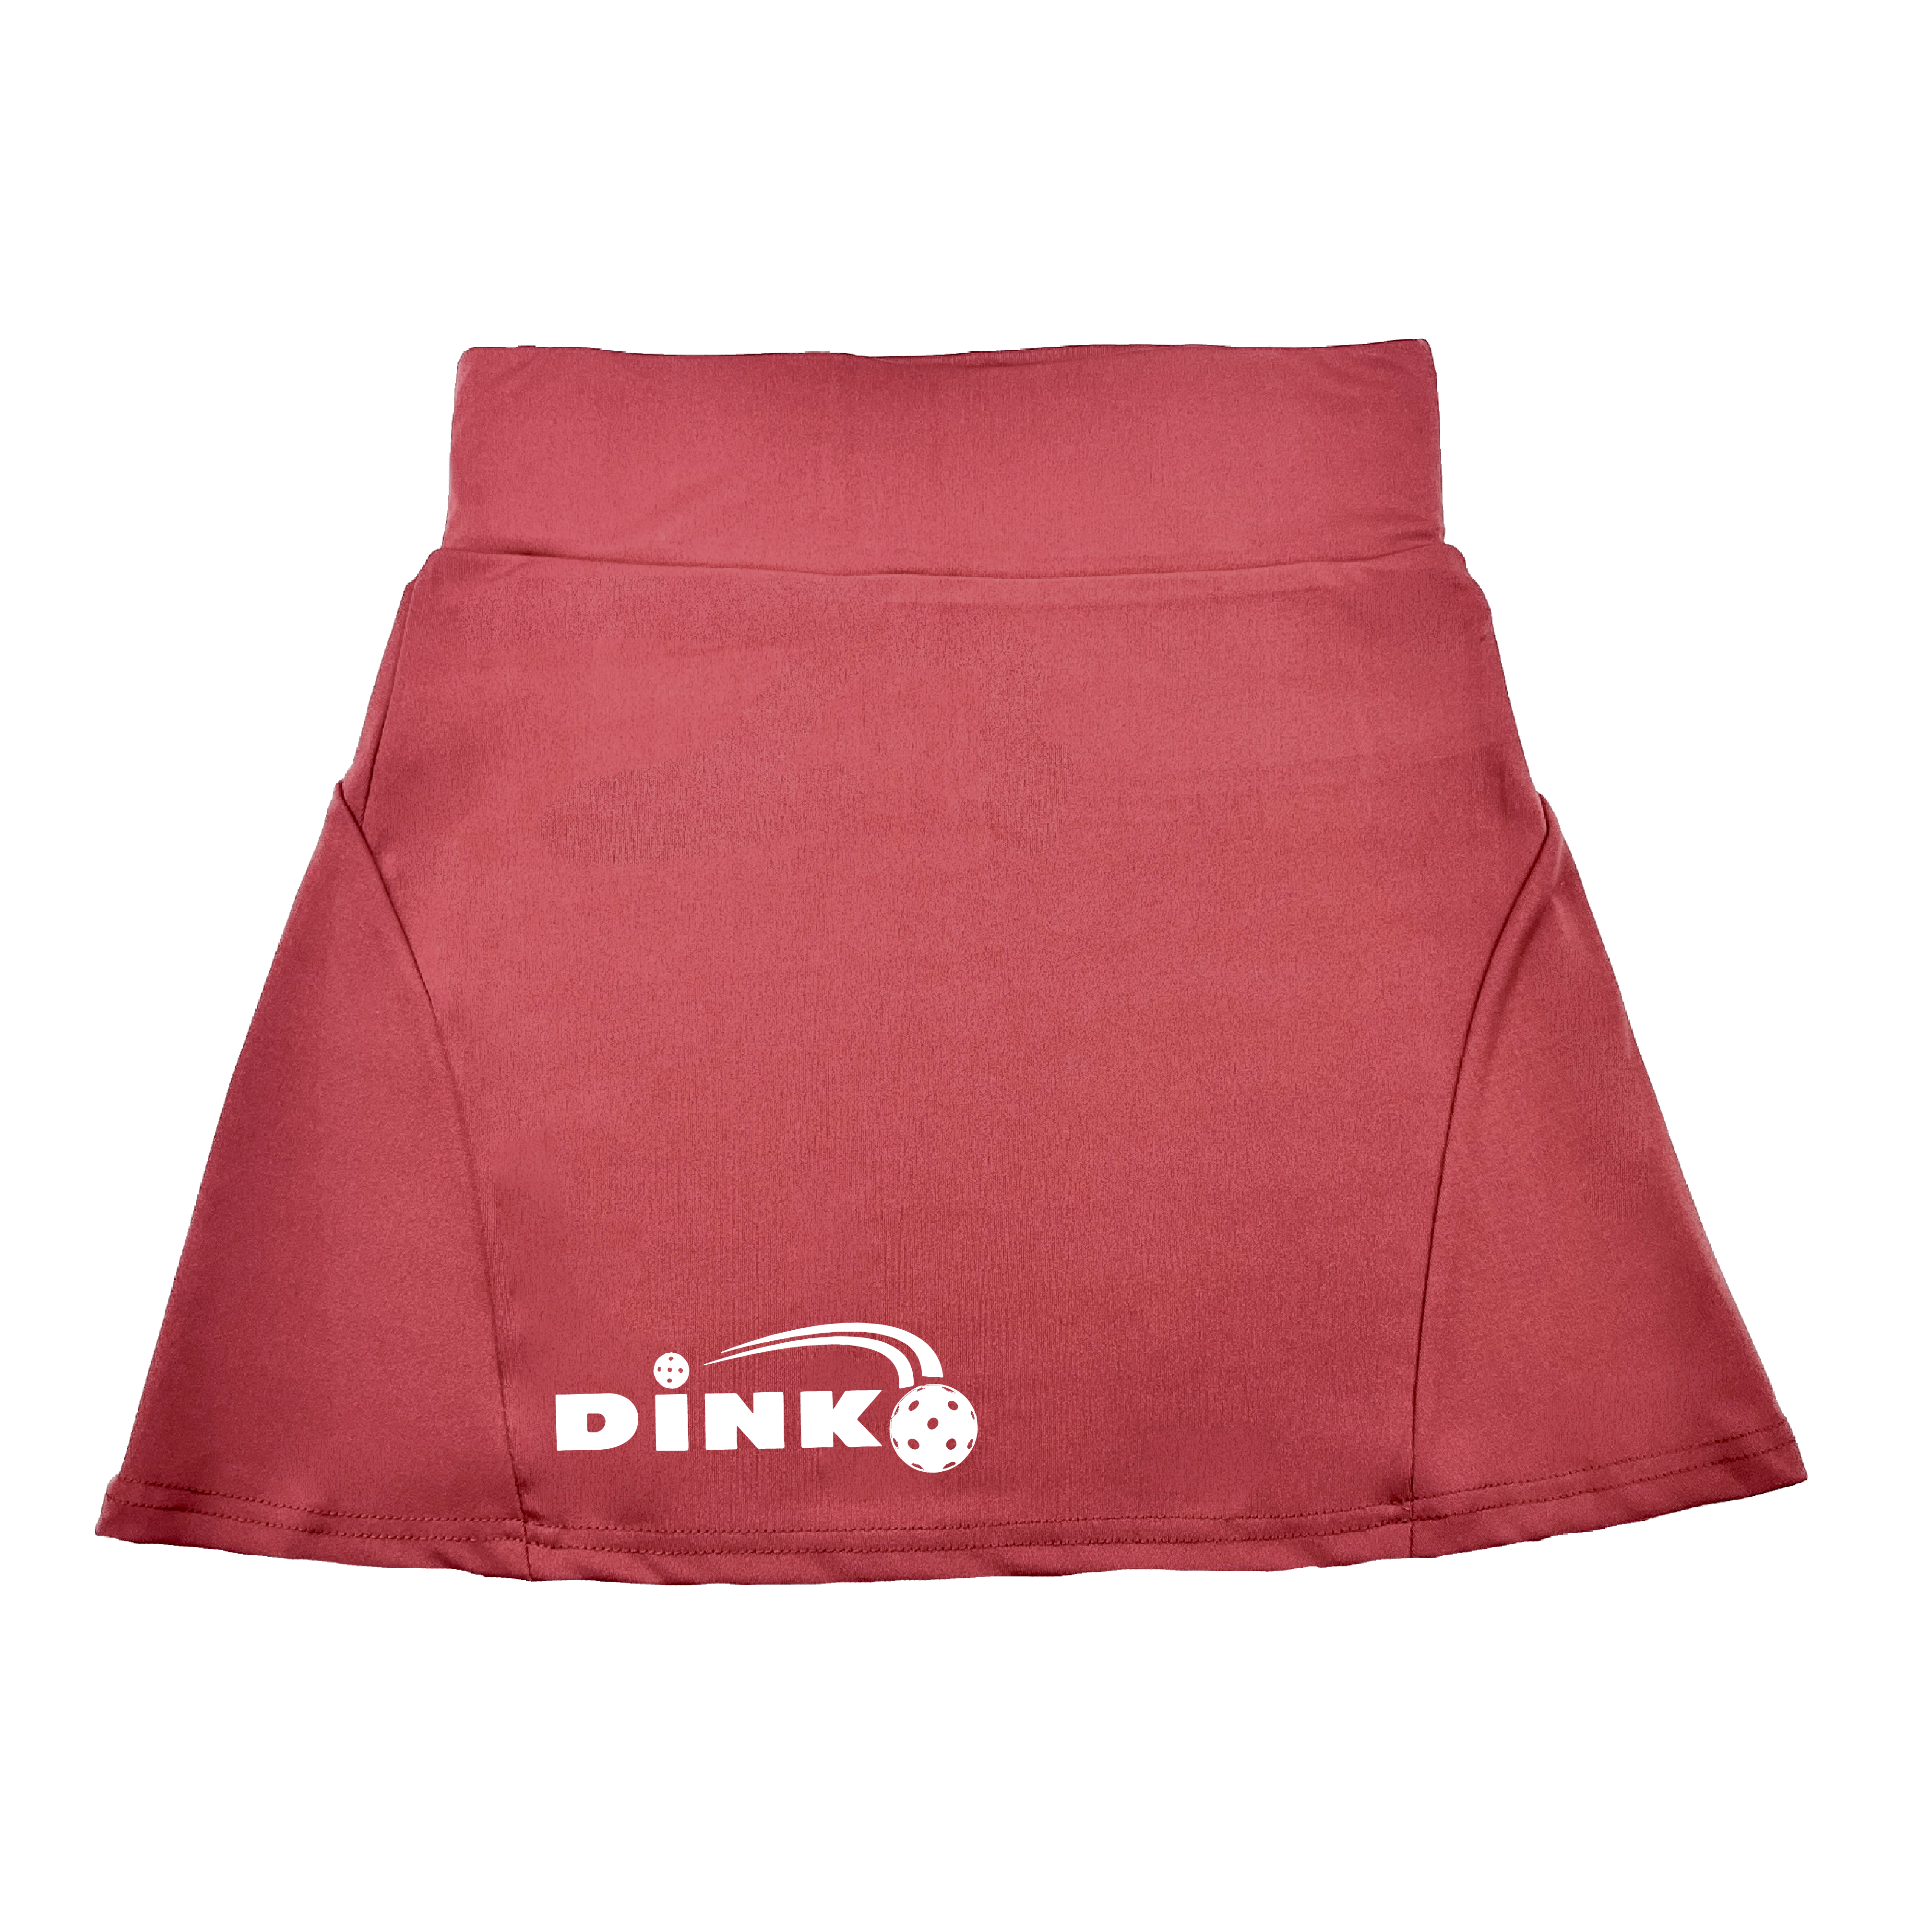 Pickleball Flirty Skort Design:  Pickleball Dink  These flirty skorts have a flat mid-rise waistband with a 3 inch waistband.  Light weight without being see through and the material wicks away moisture quickly.  Flirty pleats in the back with inner shorts for free movement and stylish coverage on the courts.  A functional zipper pocket on the back and two built in pockets on the shorts for convenient storage. 